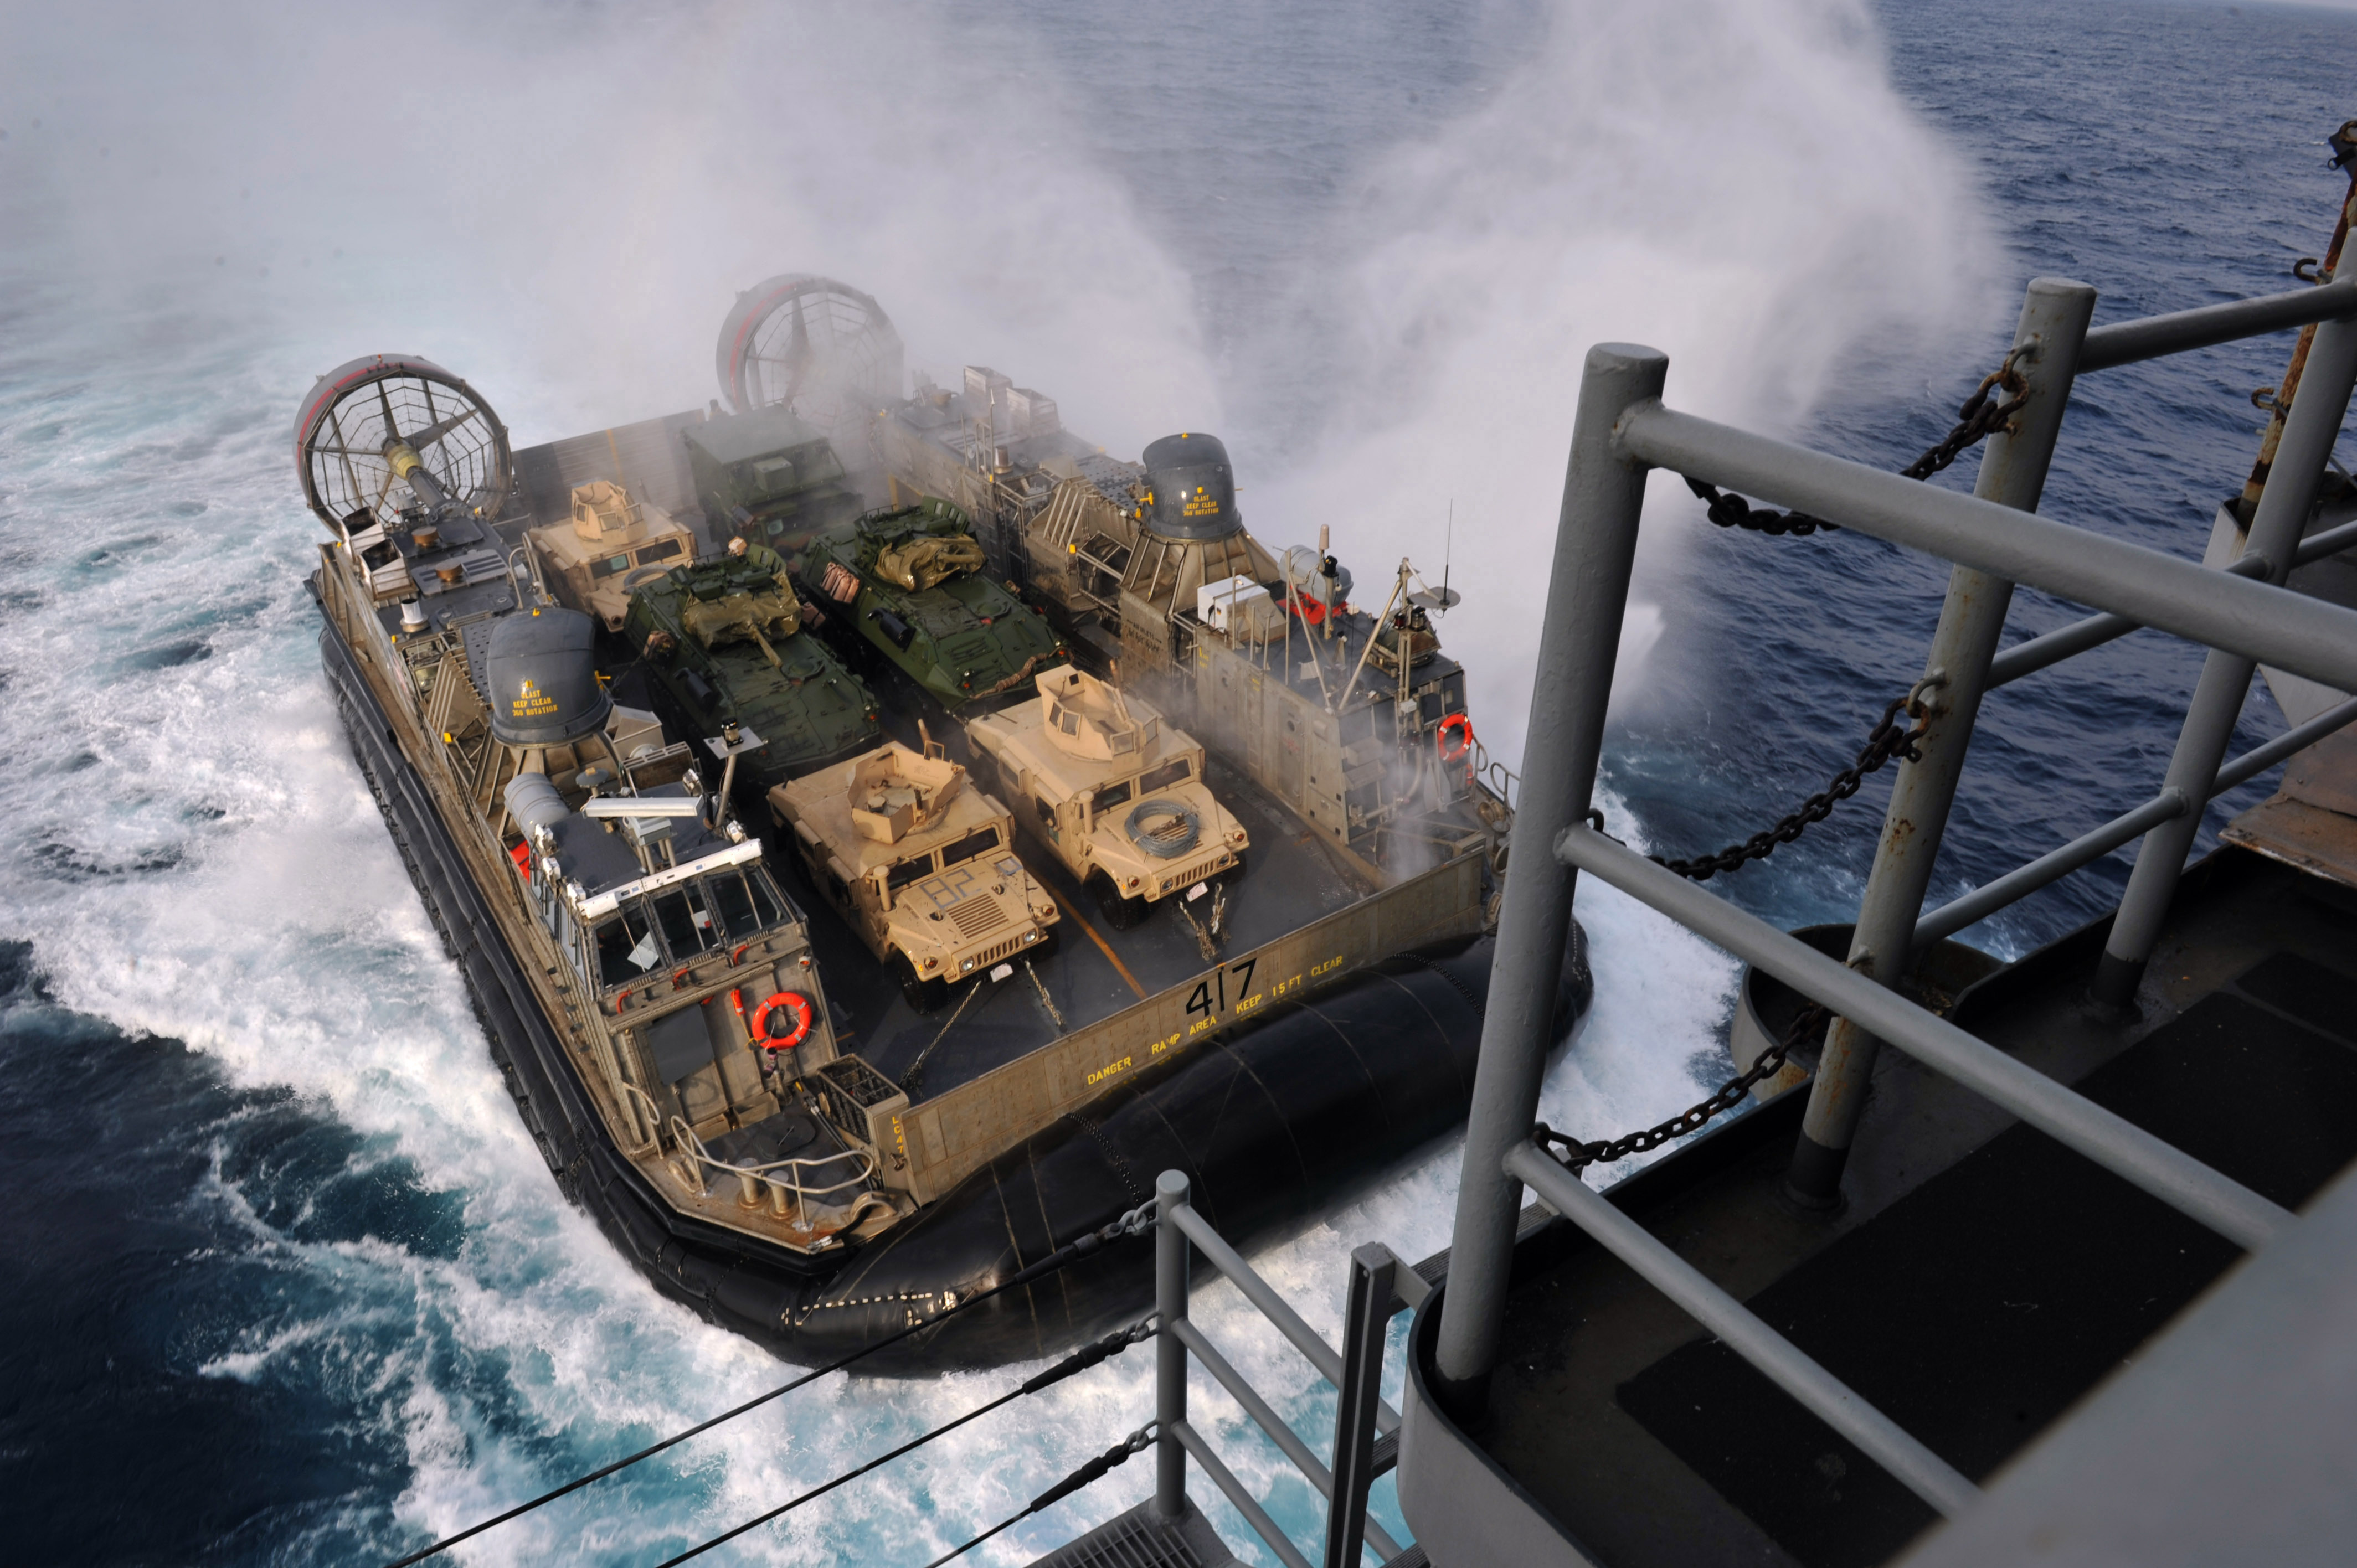 A_U.S._Navy_Landing_Craft_Air_Cushion,_more_commonly_known_as_an_LCAC,_approaches_the_well_deck_of_the_amphibious_assault_ship_USS_Bonhomme_Richard_(LHD_6)_as_the_ship_operates_in_the_East_China_Sea_on_Feb_130202-N-VA915-096.jpg